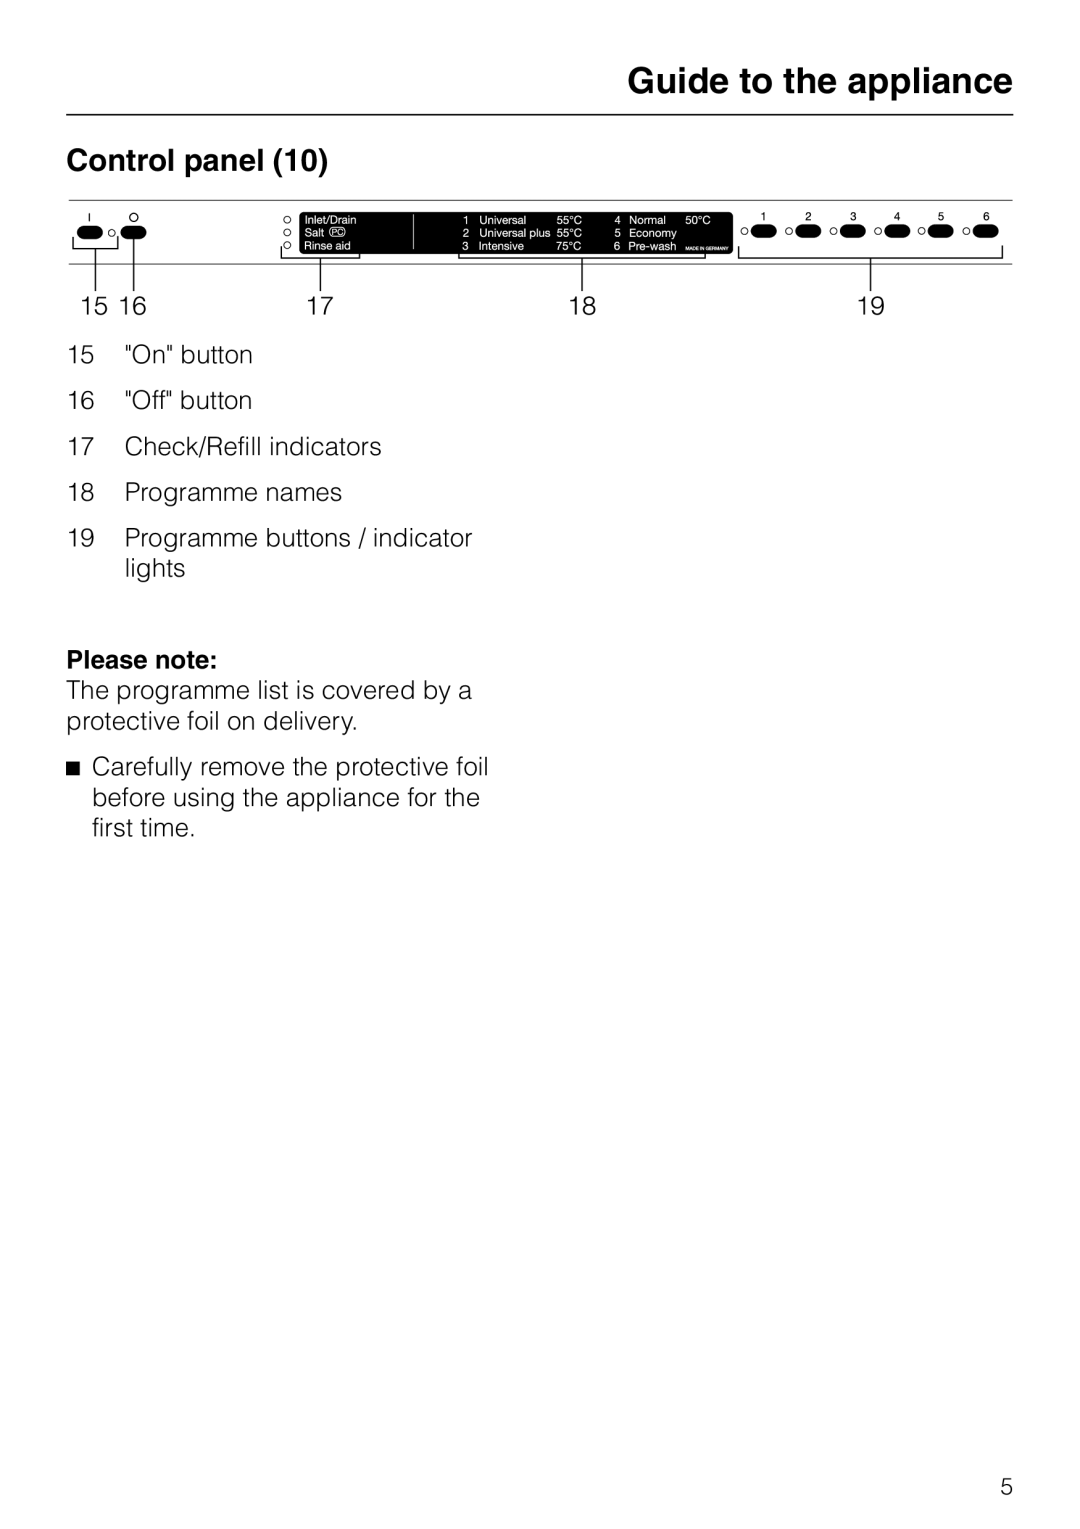 Miele dishwashers installation instructions Control panel, Please note, Guide to the appliance 